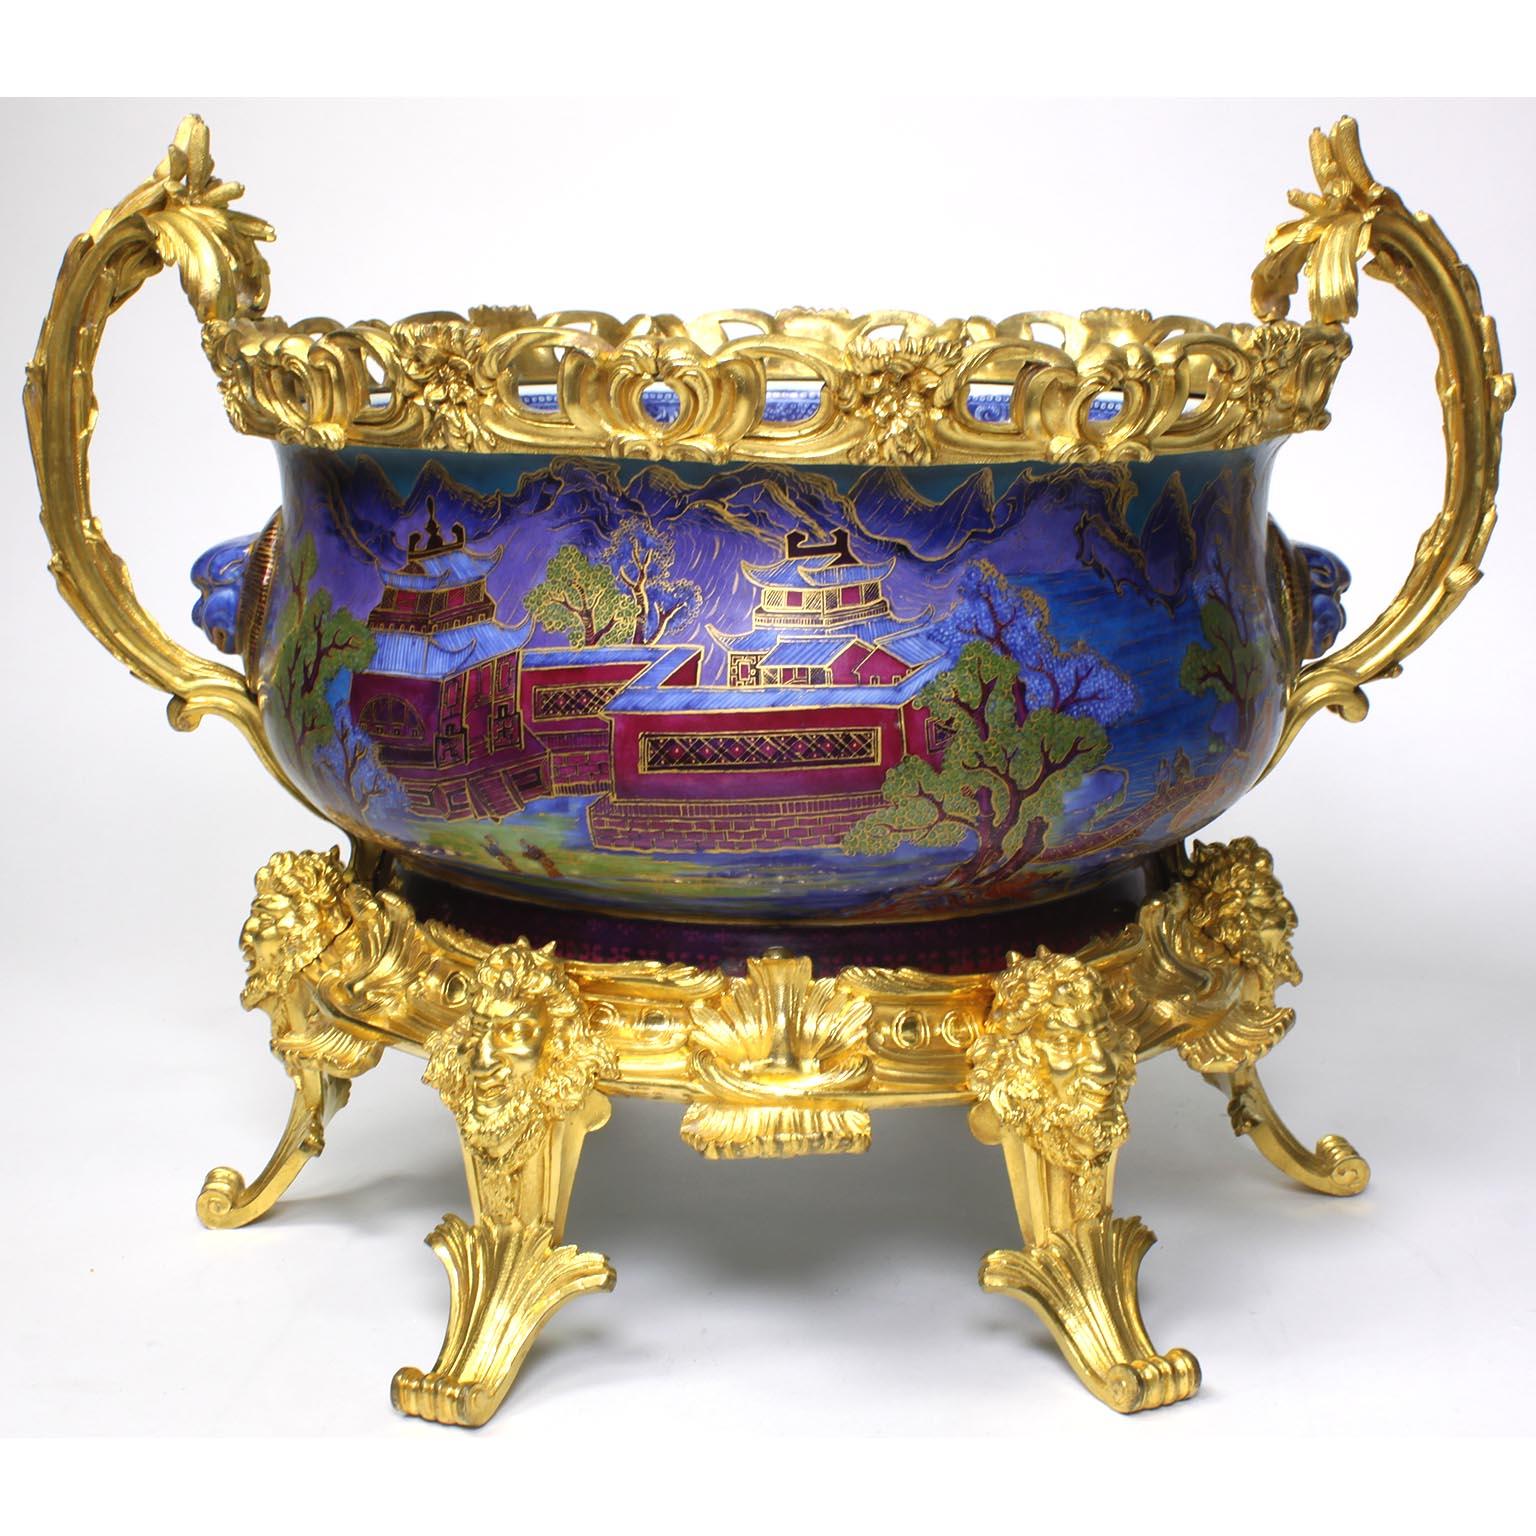 A very fine and large 19th century Chinese export famille verte porcelain and French figural ormolu-mounted Chinoiserie style centerpiece jardinière, in the manner of Edward Holmes Baldock (1777-1845). The circular-ovoid porcelain bowl or cachepot,